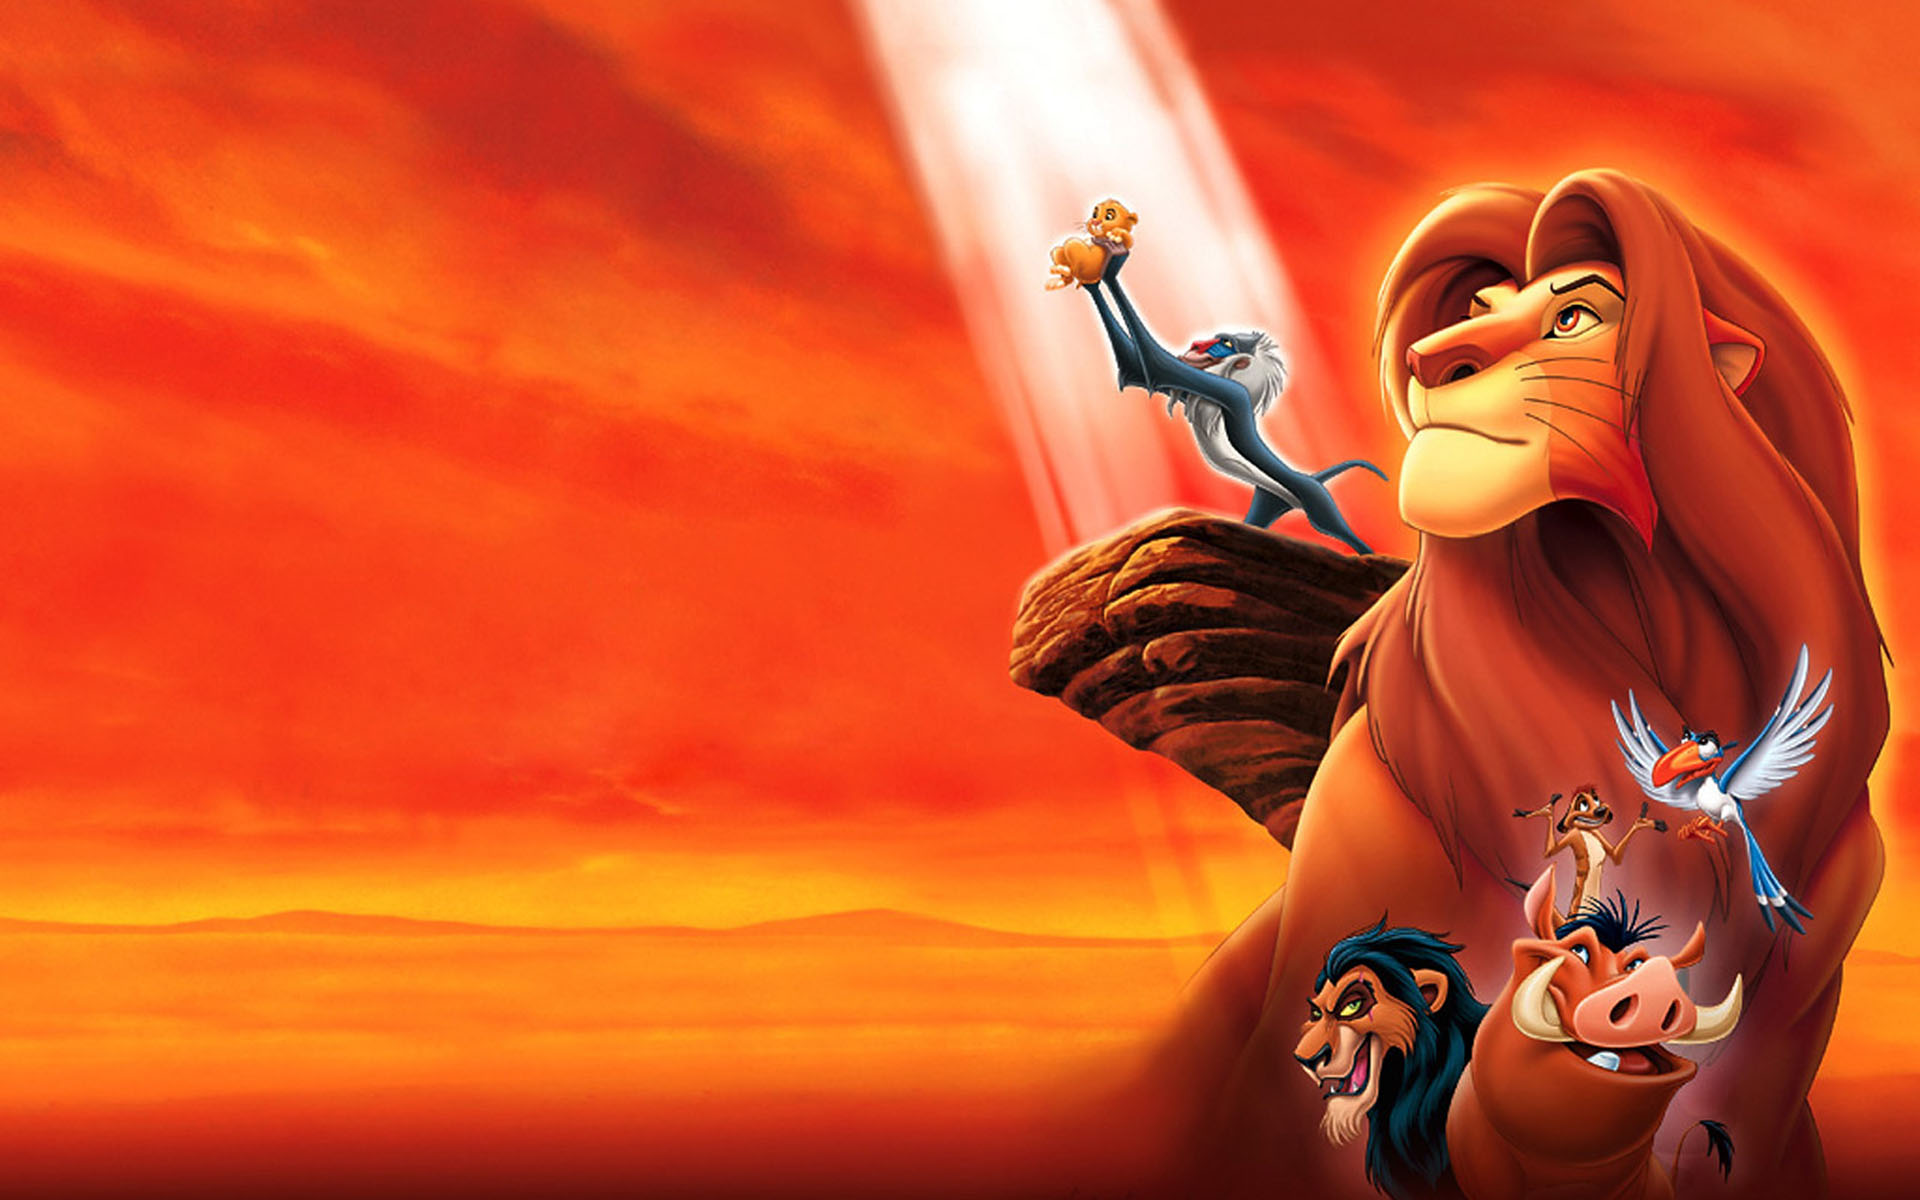 Lion King Wallpaper 11075 Hd Wallpapers in Animals   Imagescicom